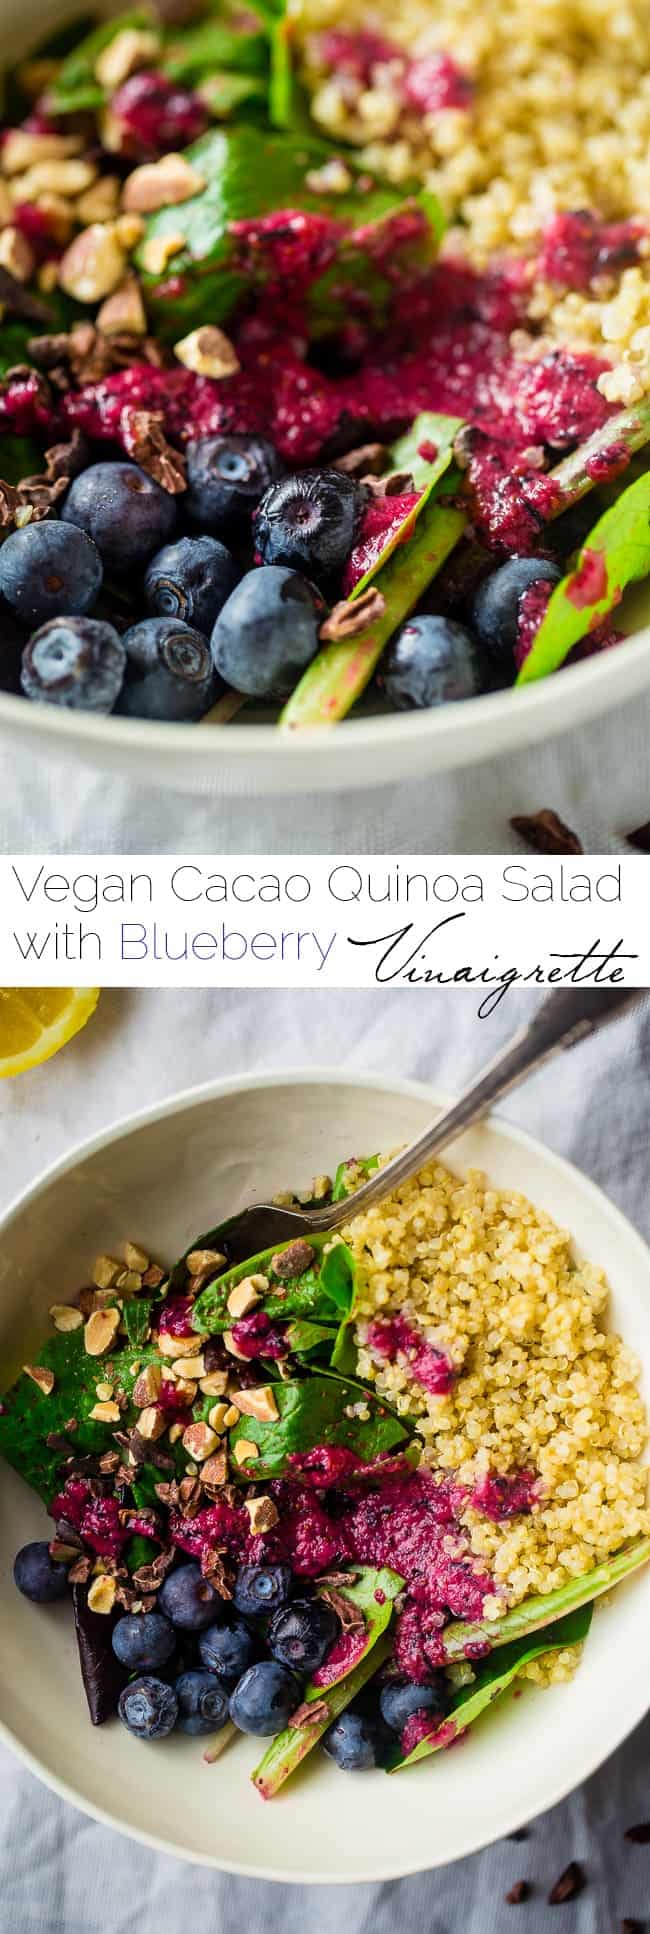 Vegan Blueberry Cacao Superfood Quinoa Salad - This healthy quinoa salad recipe has almonds, cacao nibs and a blueberry vinaigrette. It's an easy, gluten free and vegan meal that's packed with superfoods for only 360 calories!| Foodfaithfitness.com | @FoodFaithFit